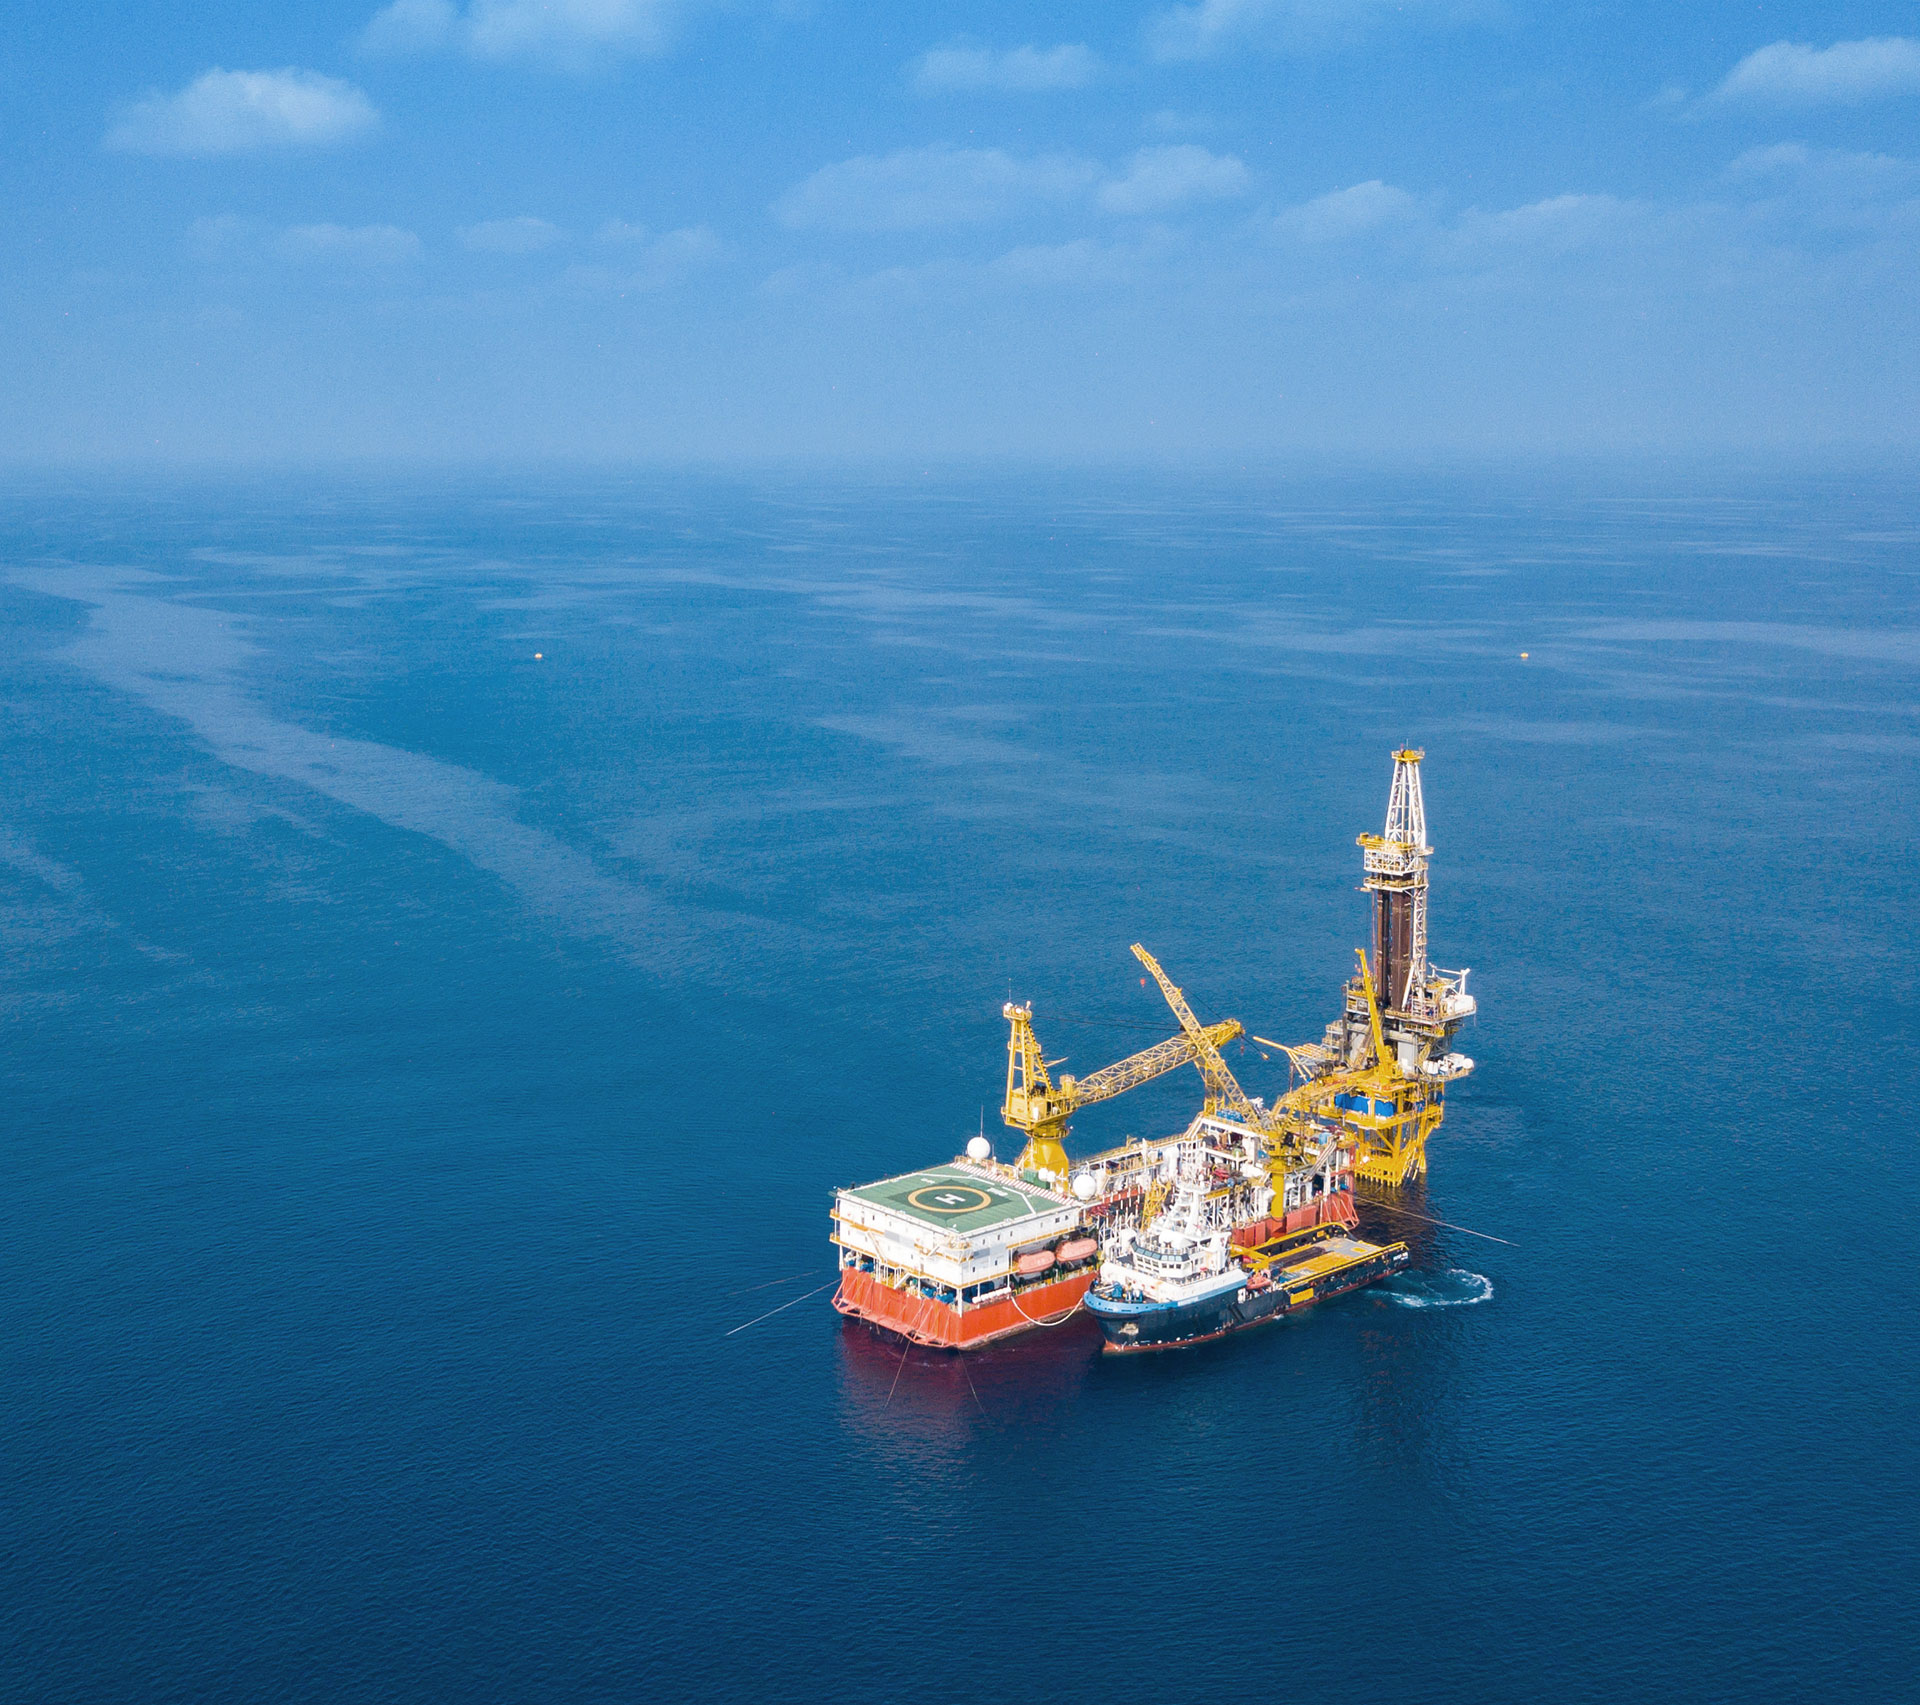 Aerial view of barge oil rig